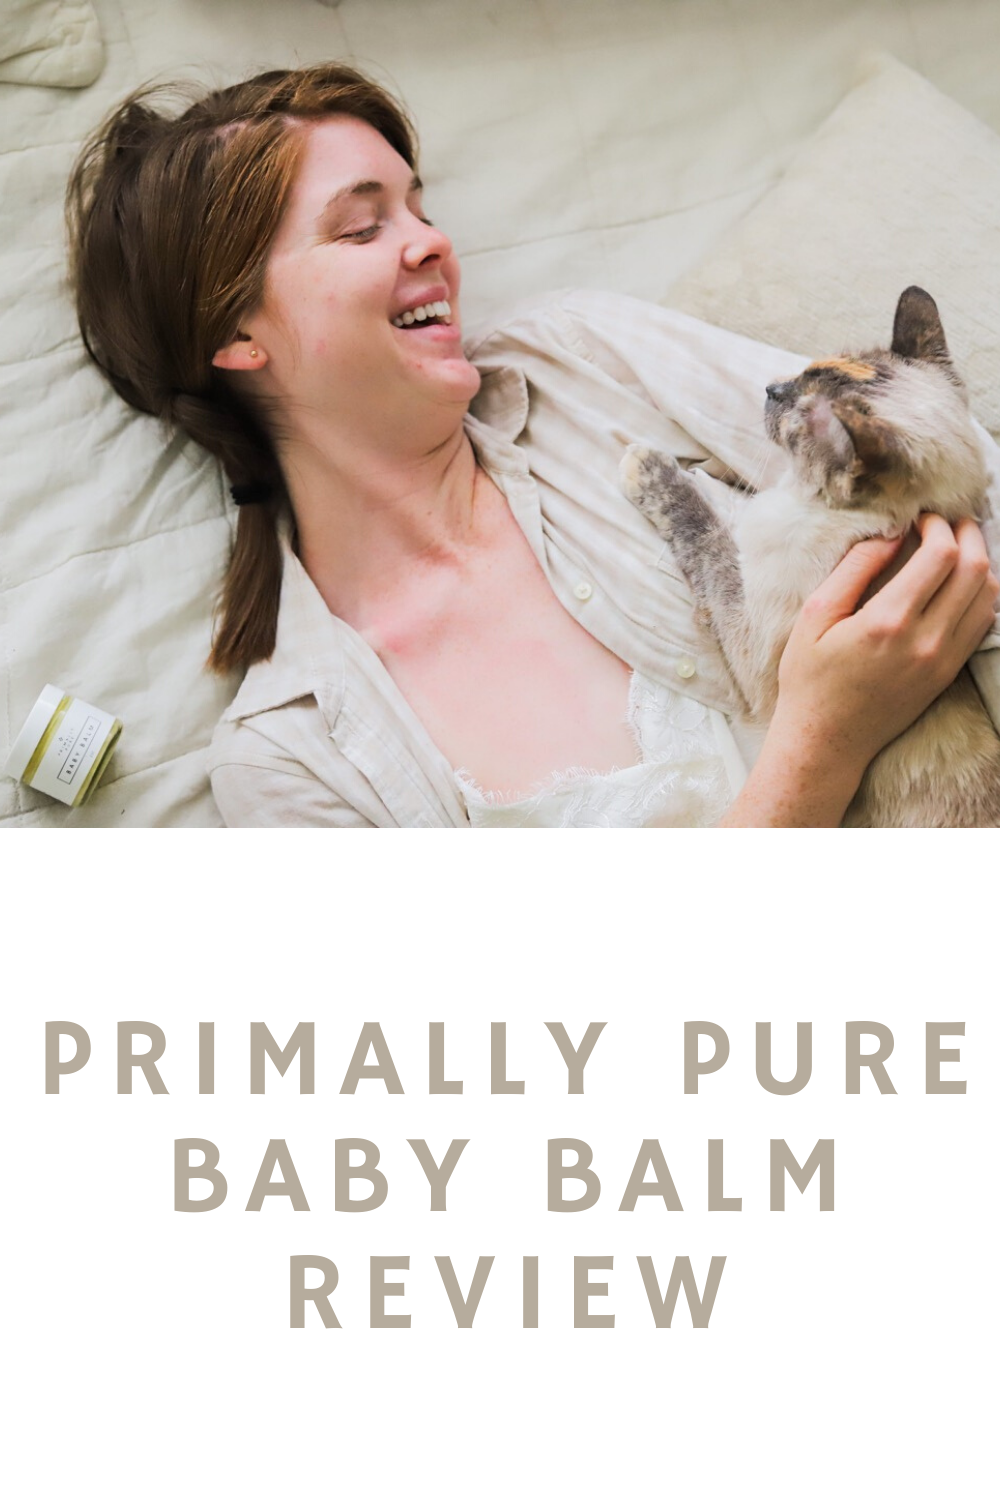 primally pure baby balm review, under eye cream that doesn't cause milia, nontoxic, clean, nature is smarter than science, primally pure discount code, la blogger, lments of style, natural diaper rash cream, marshmallow root